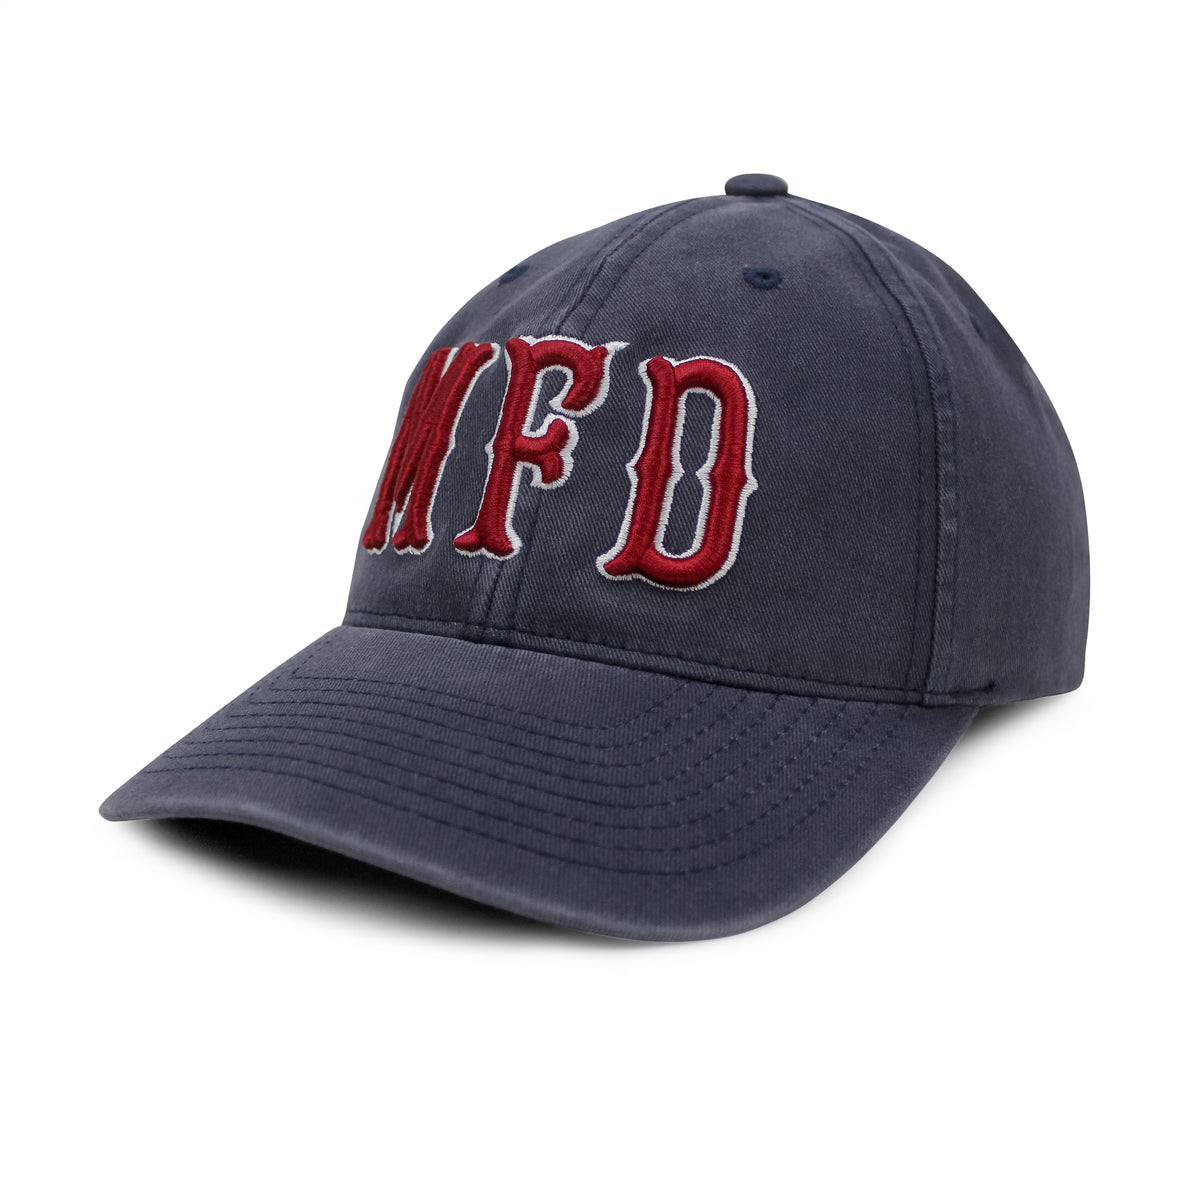 Flexfit 6997 Garment Washed Hat (Flexible Fitted) w/ Old School 3D Font - *DISCONTINUED - XL/XXL BLACK ONLY